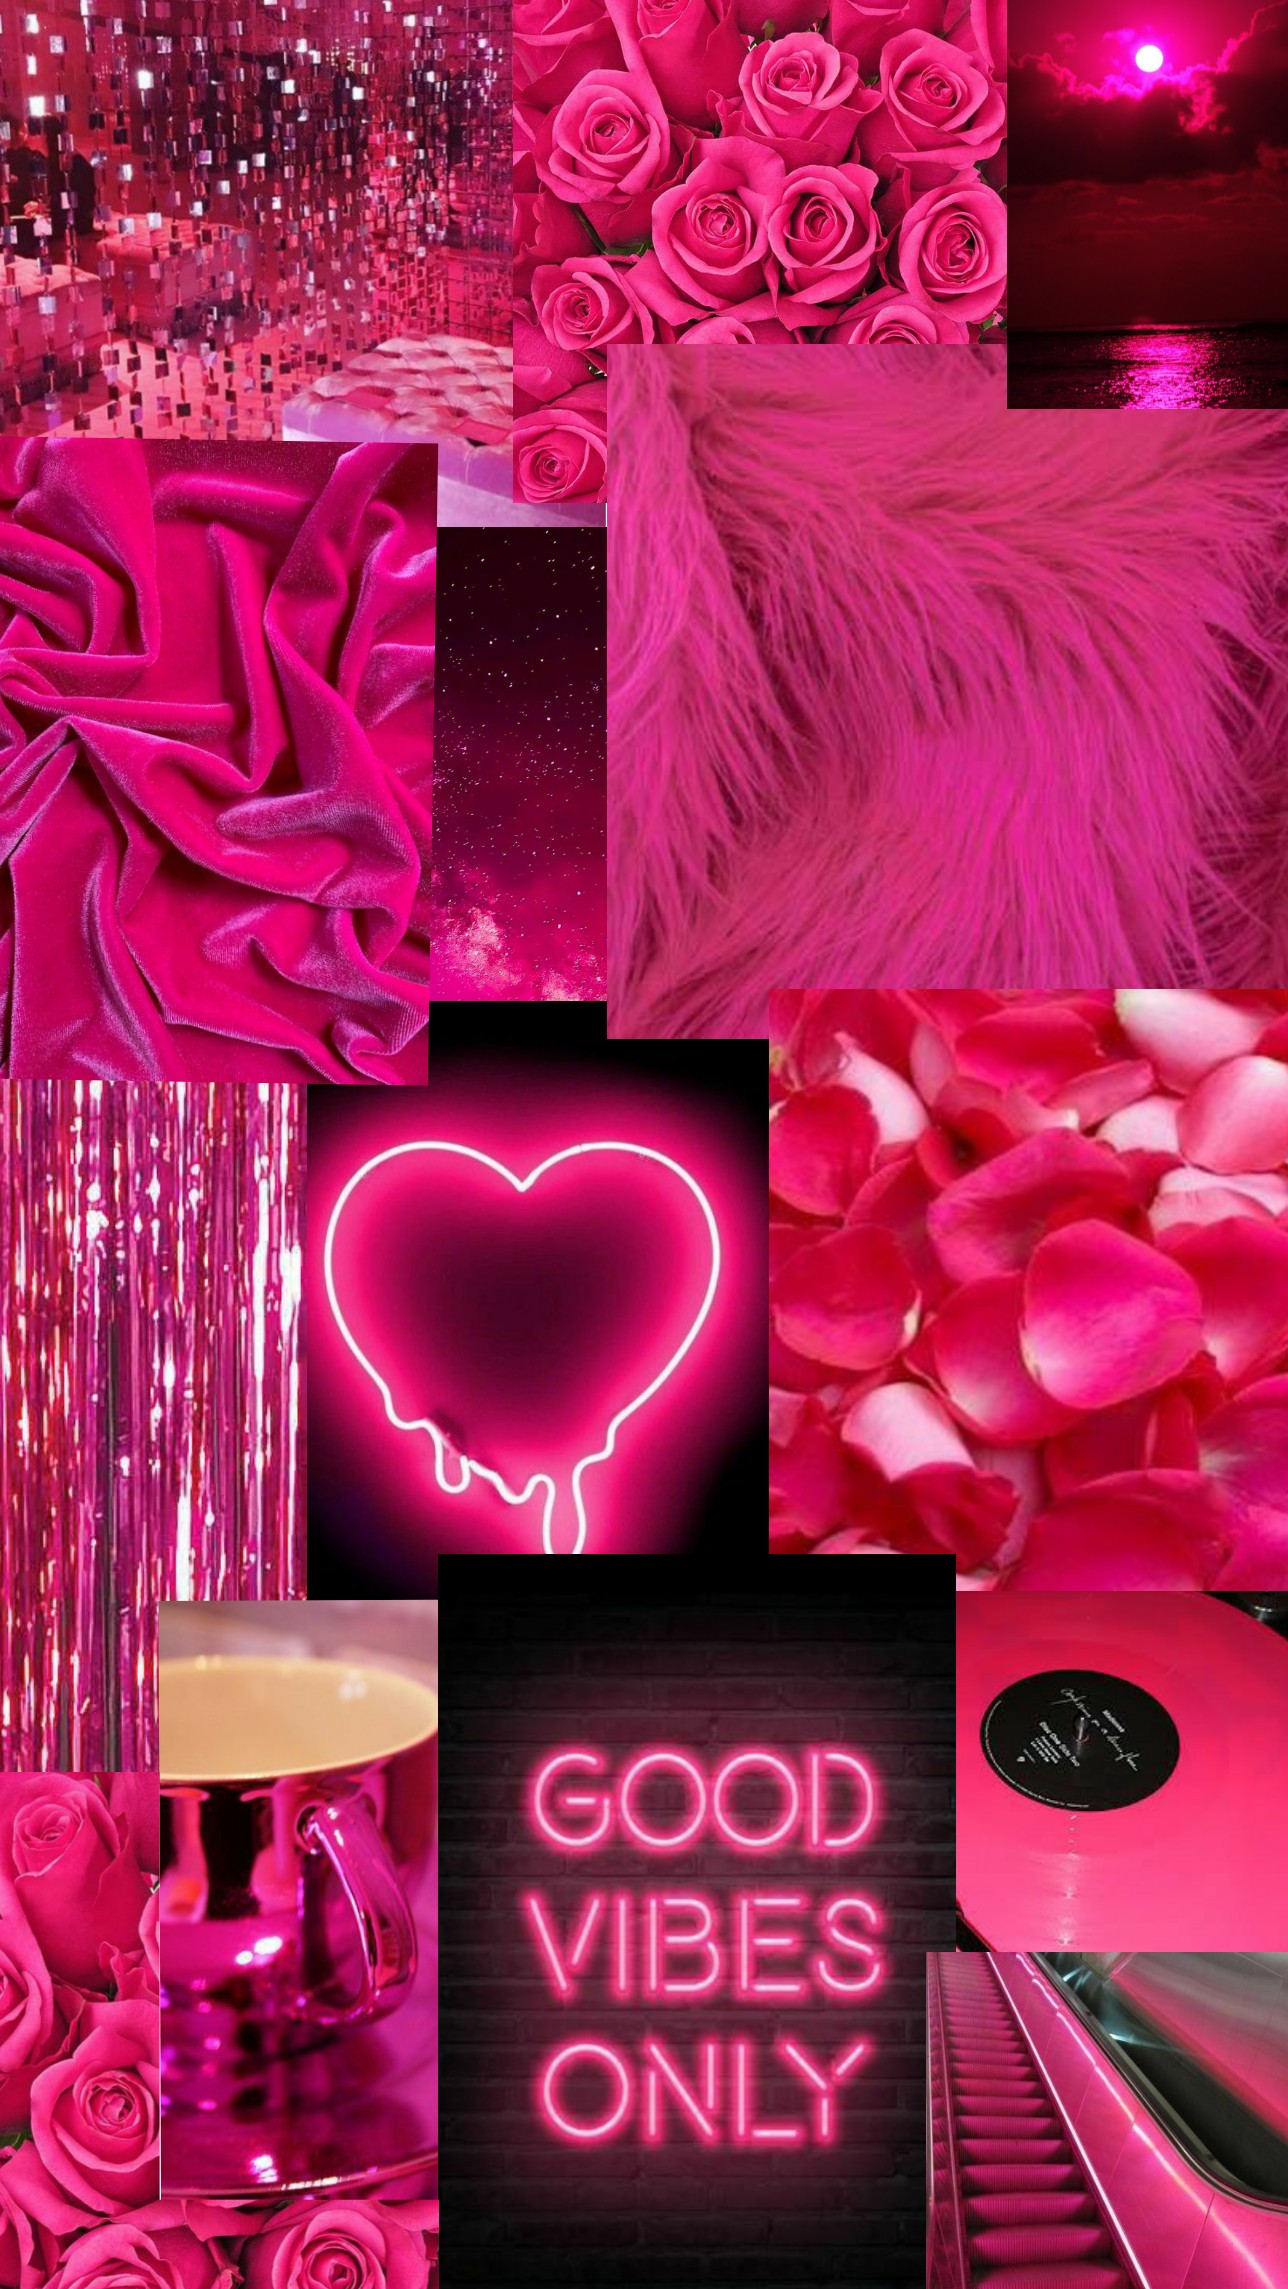 hotpink aesthetic #hotpink #aesthetic image by @_demyy_